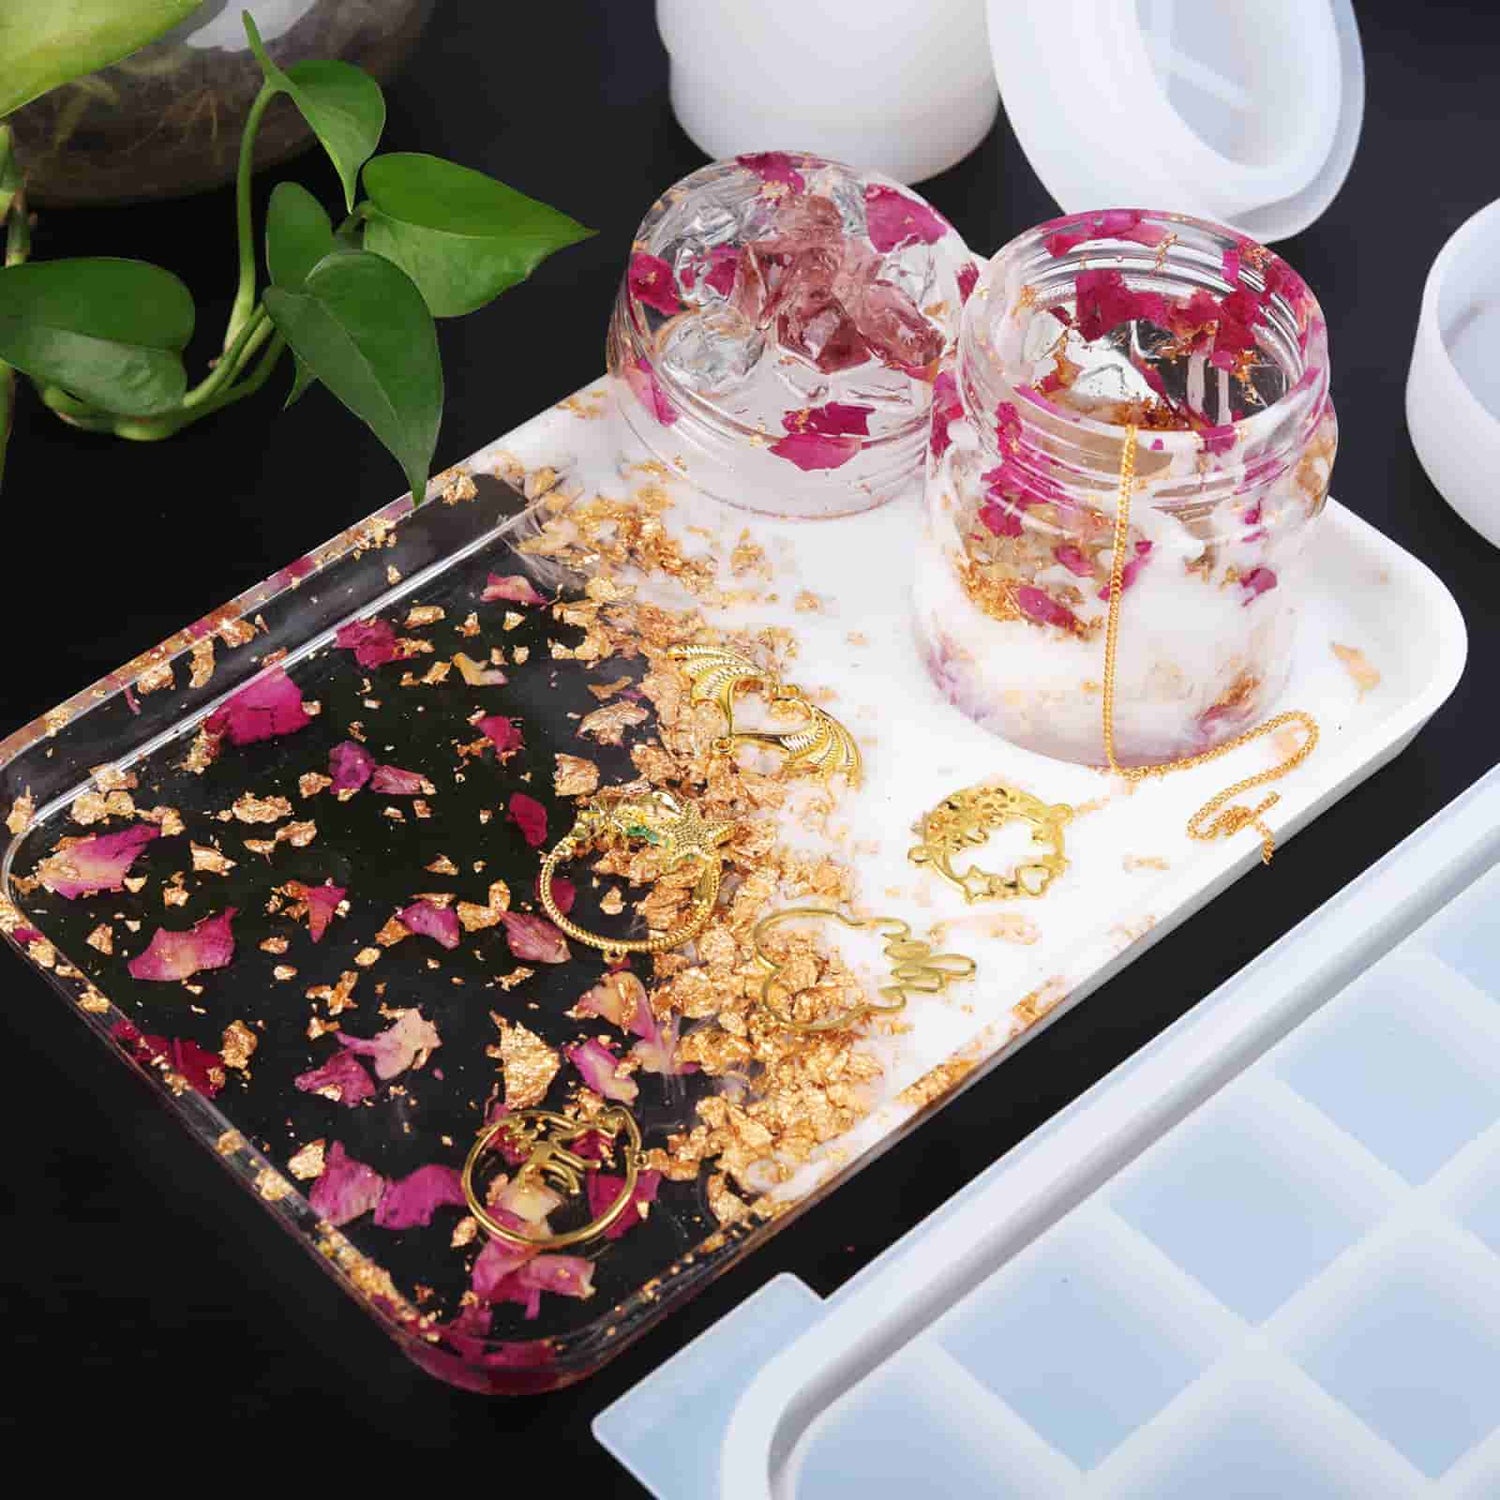 LET'S RESIN Resin Mold Silicone Kit with Resin Rolling Tray Mold, Ashtray  Resin Jar Mold with Lid for Casting Resin,Epoxy Resin,DIY Storage Container